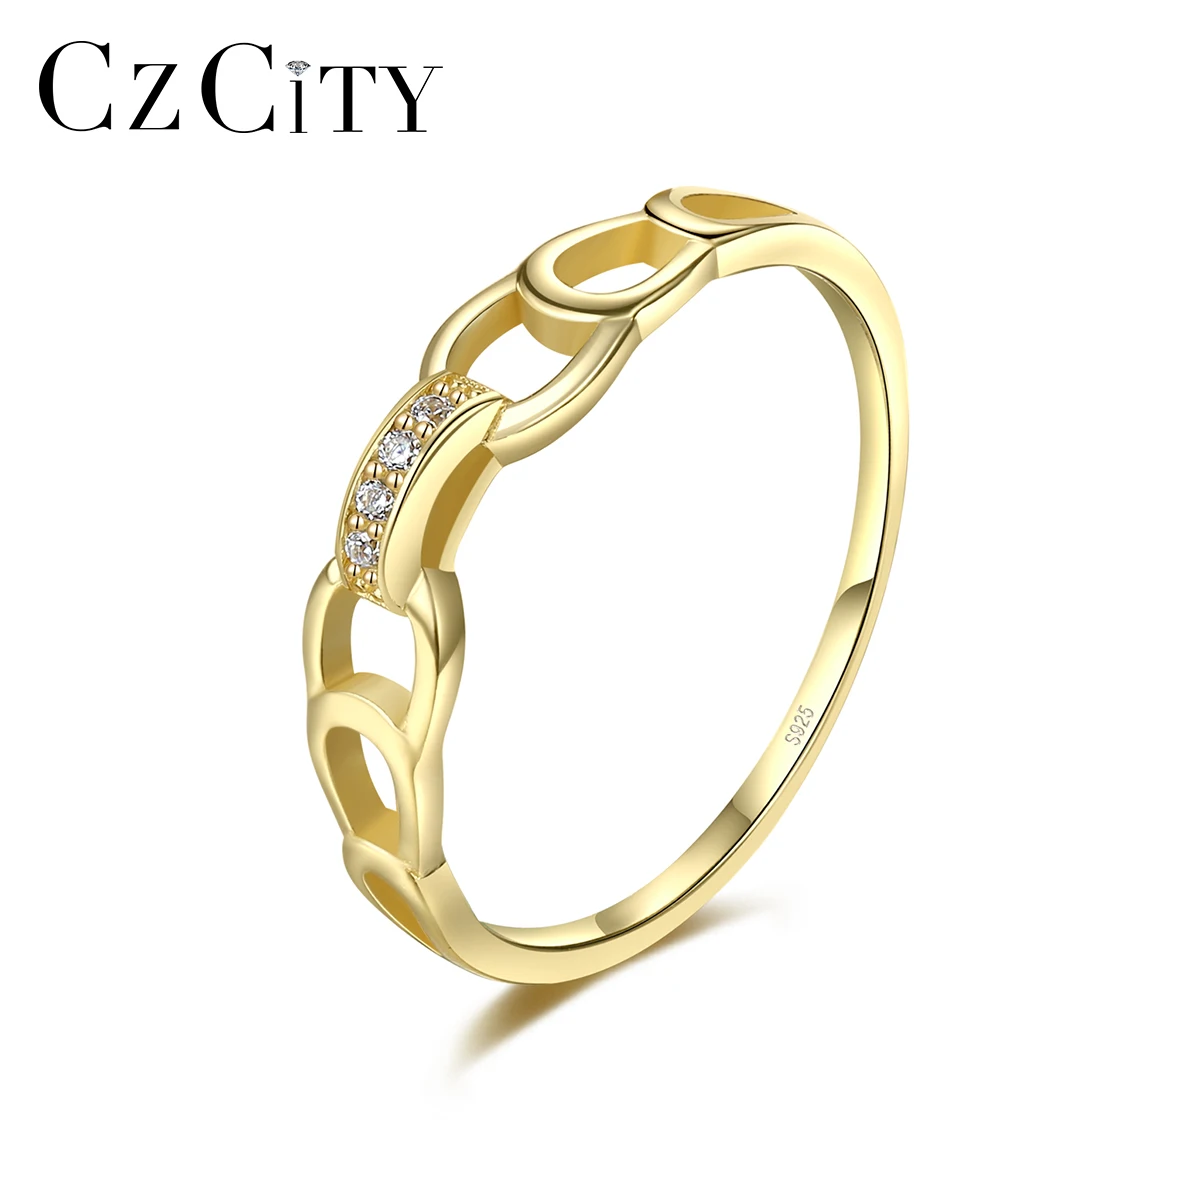 

CZCITY Delicate Ladies Cuban Chain Stylish Rings Jewelry 925 Silver Gold Plated Women Ring Wholesale